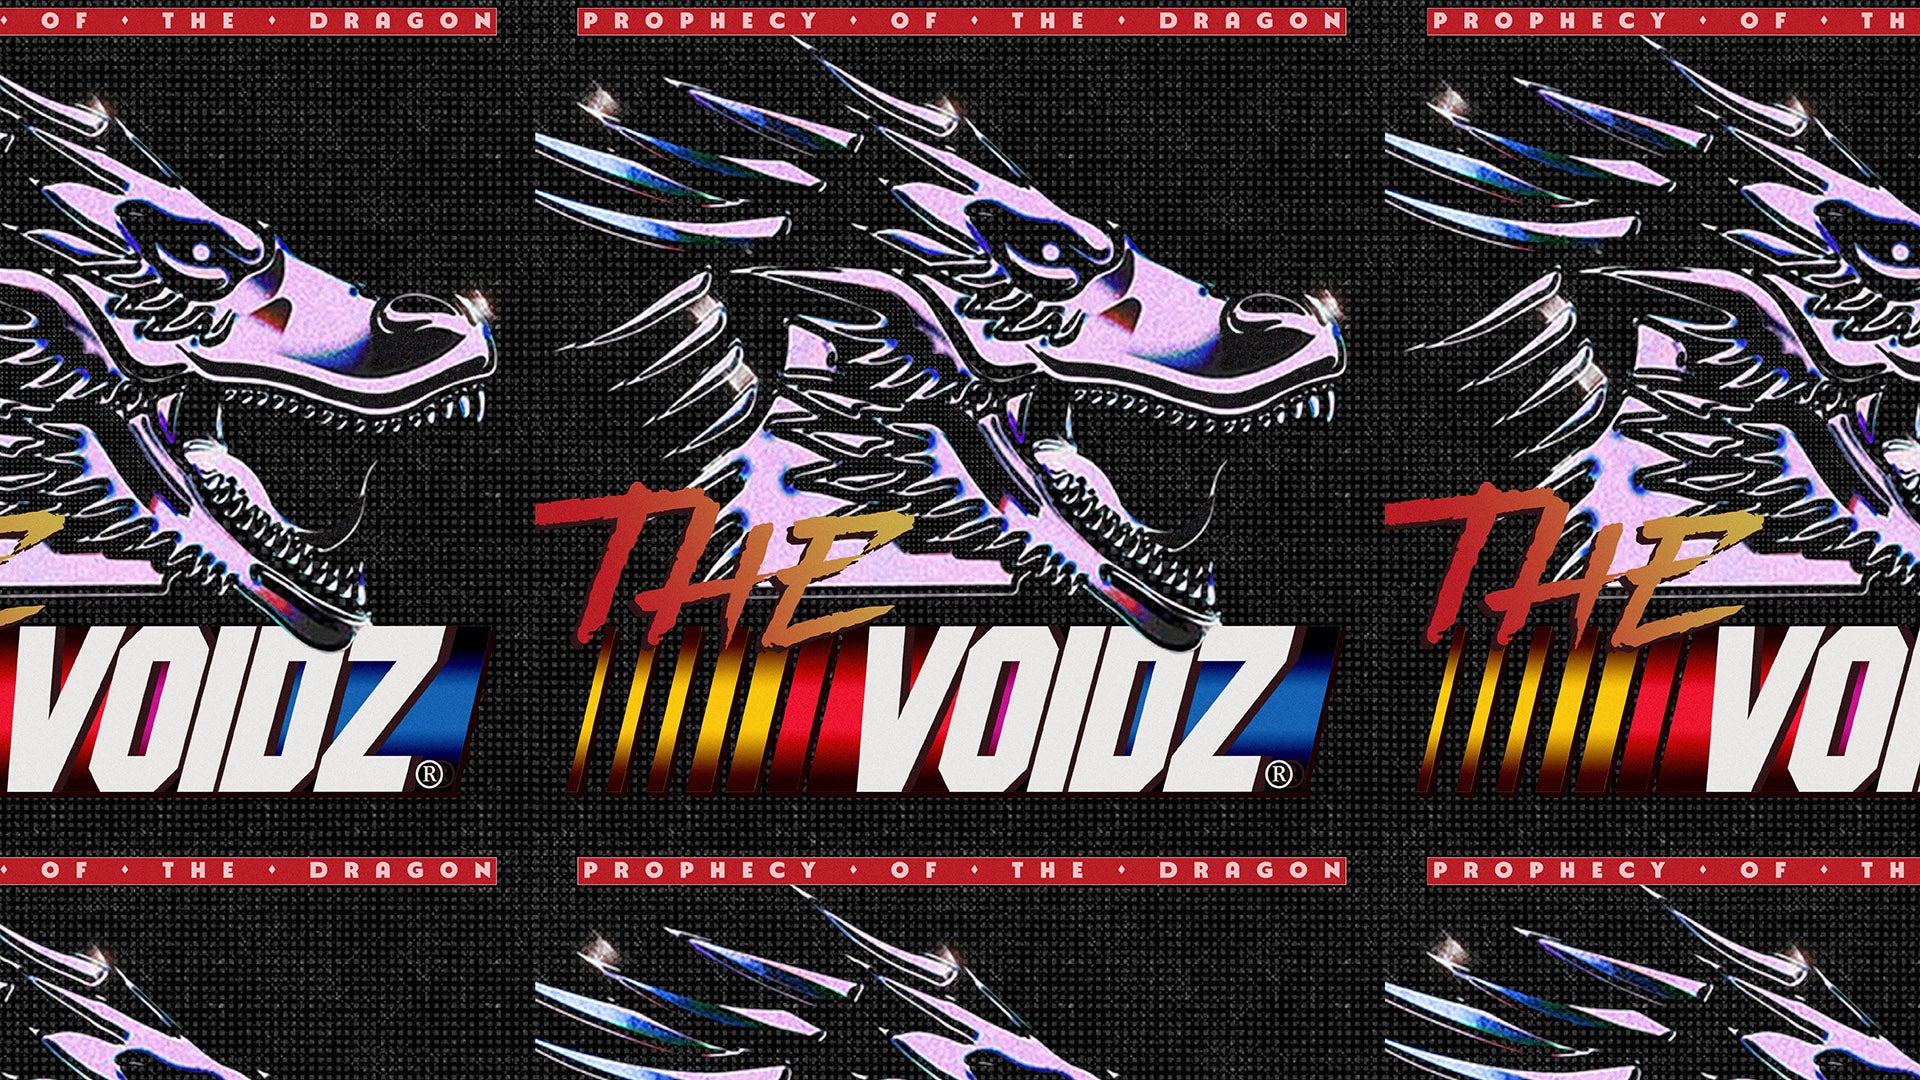 The Voidz's "Prophecy of the Dragon" is OUT NOW